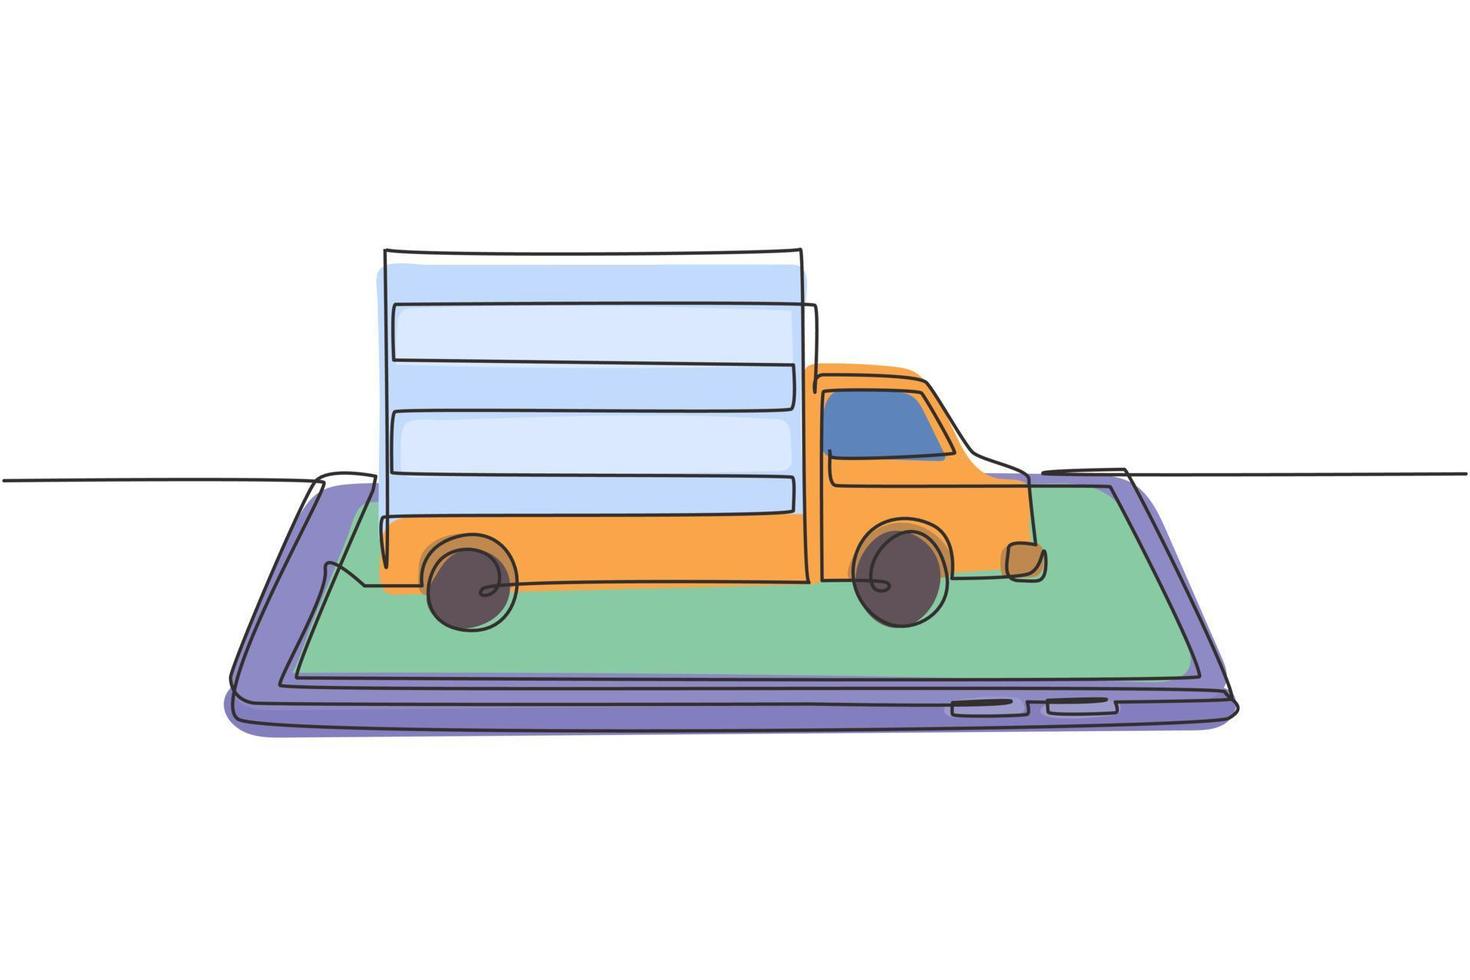 Continuous one line drawing delivery car deliver packages and ride on smartphone screen. Online delivery service. Fast delivery parcel concept. Single line draw design vector graphic illustration